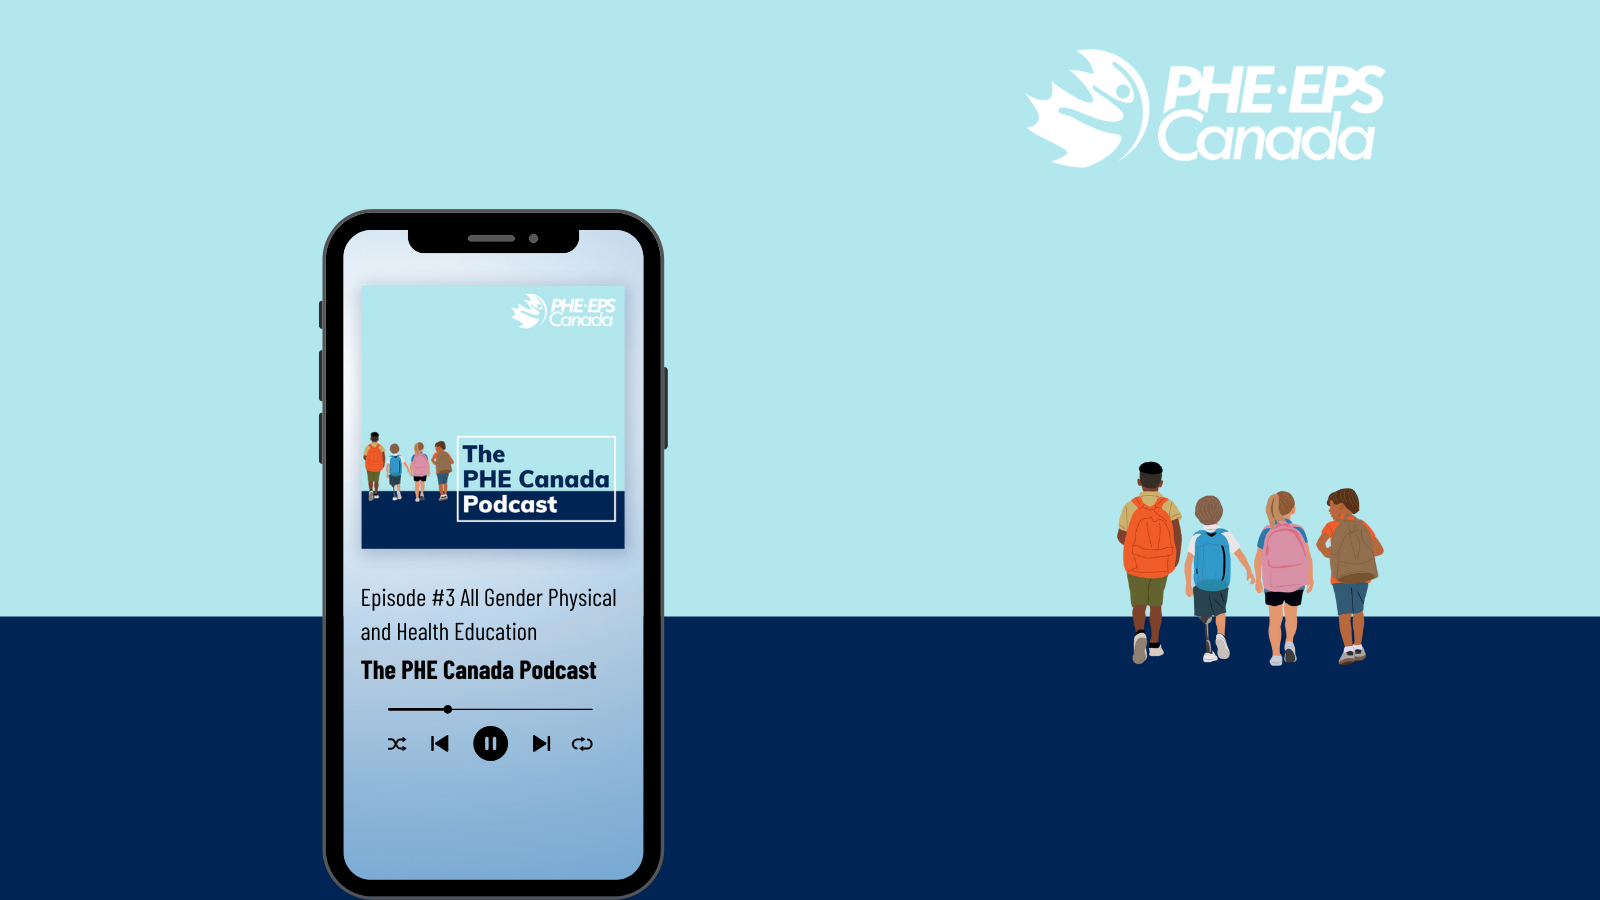 The PHE Canada Podcast, Episode 3: All Gender Physical and Health Education